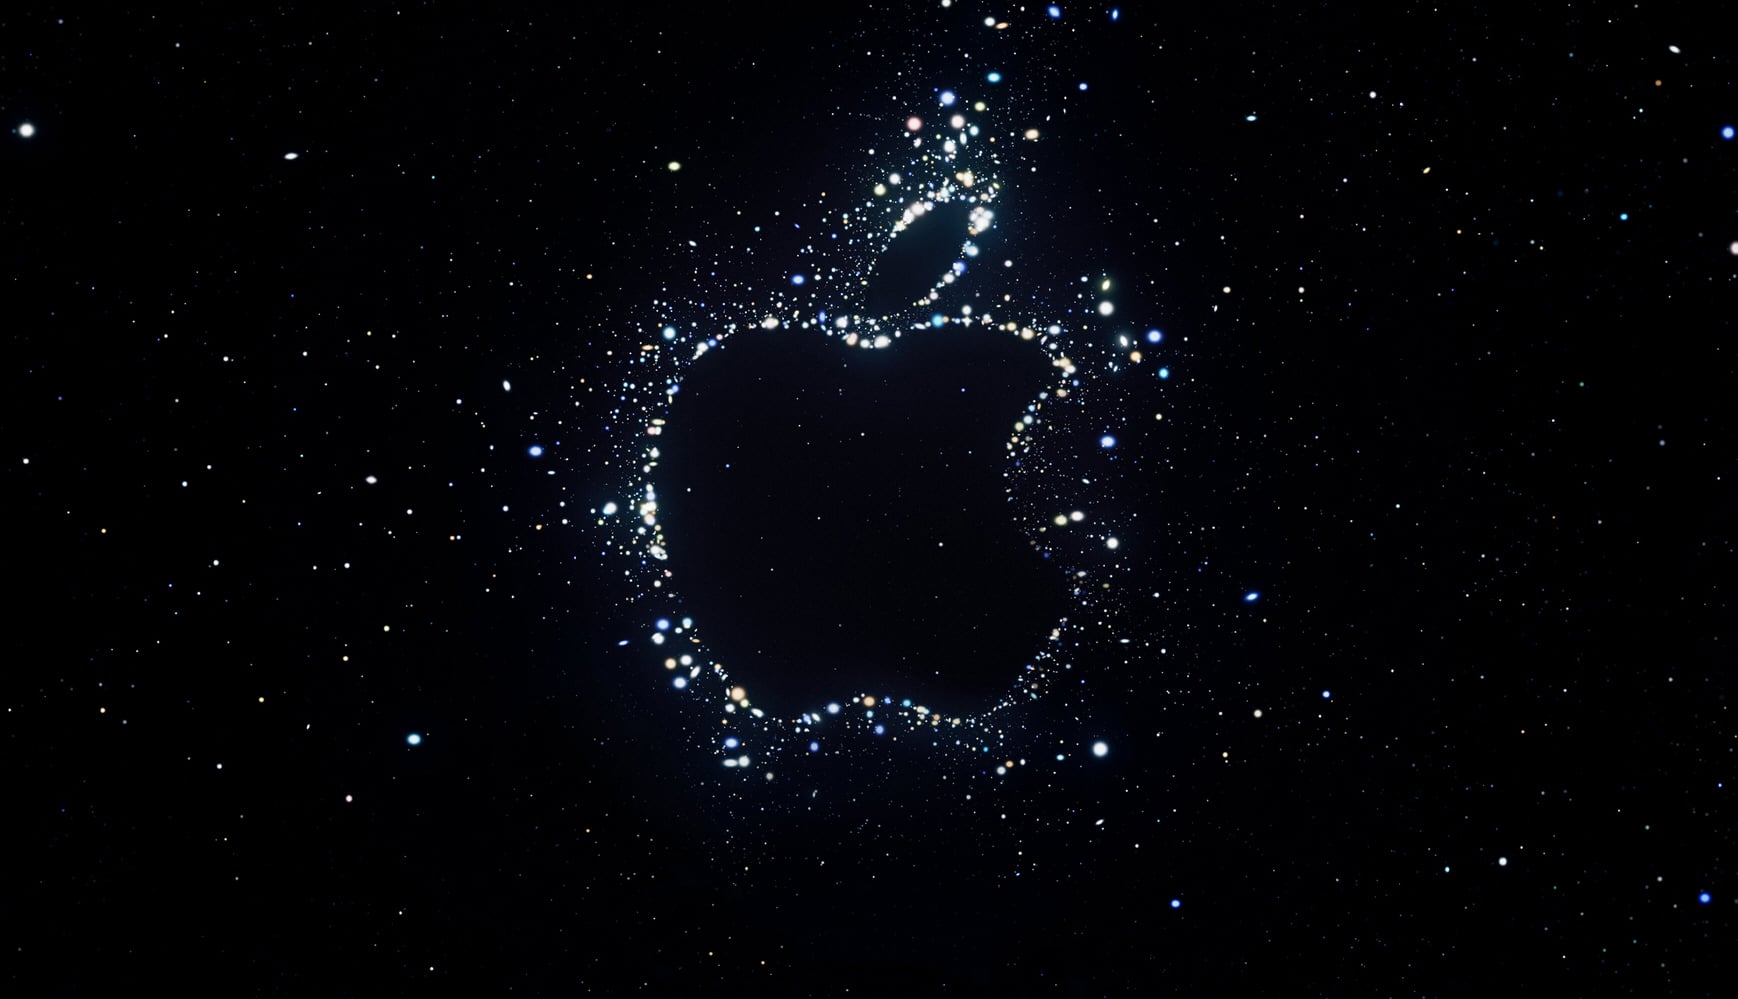 Watch Apple reveal the new iPhone 14 at today's 'Far Out' event, here live